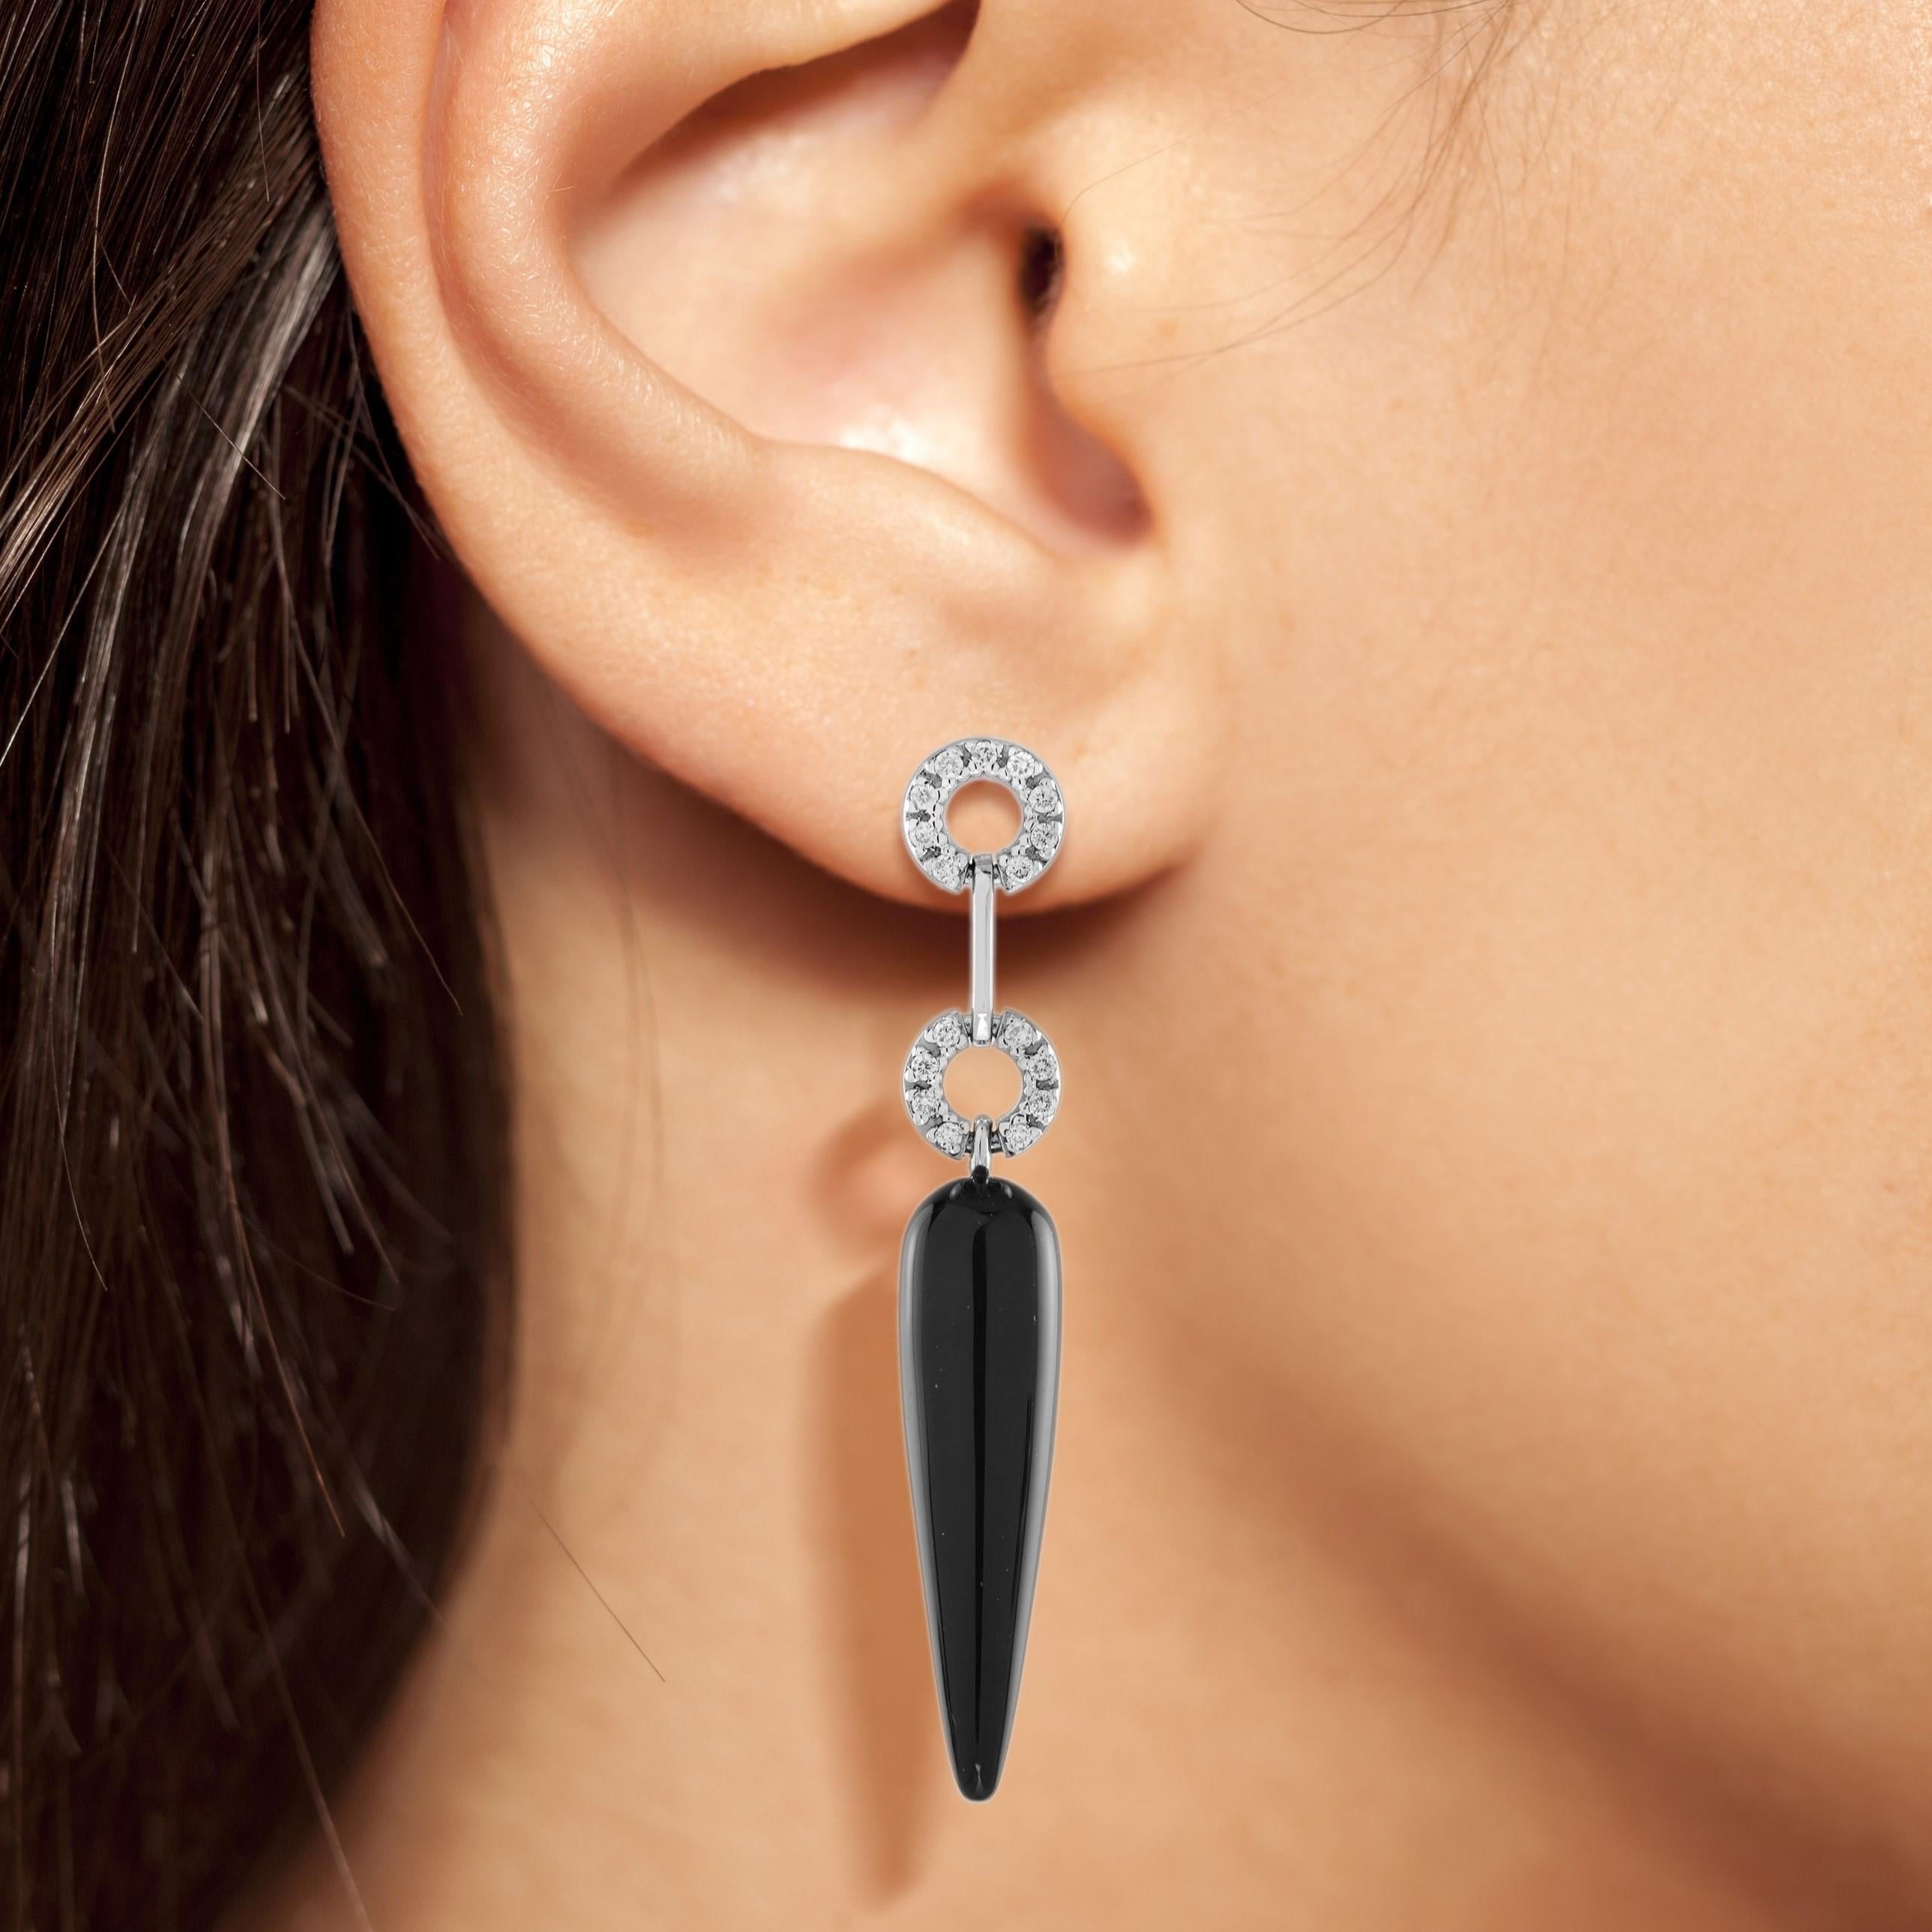 This beautiful pair of unique drop earrings are truly a statement making piece. Measuring about 41 mm. long, they are crafted in 14k white gold and are secured by a post and butterfly fitting. These earrings feature two chili shape pieces of black